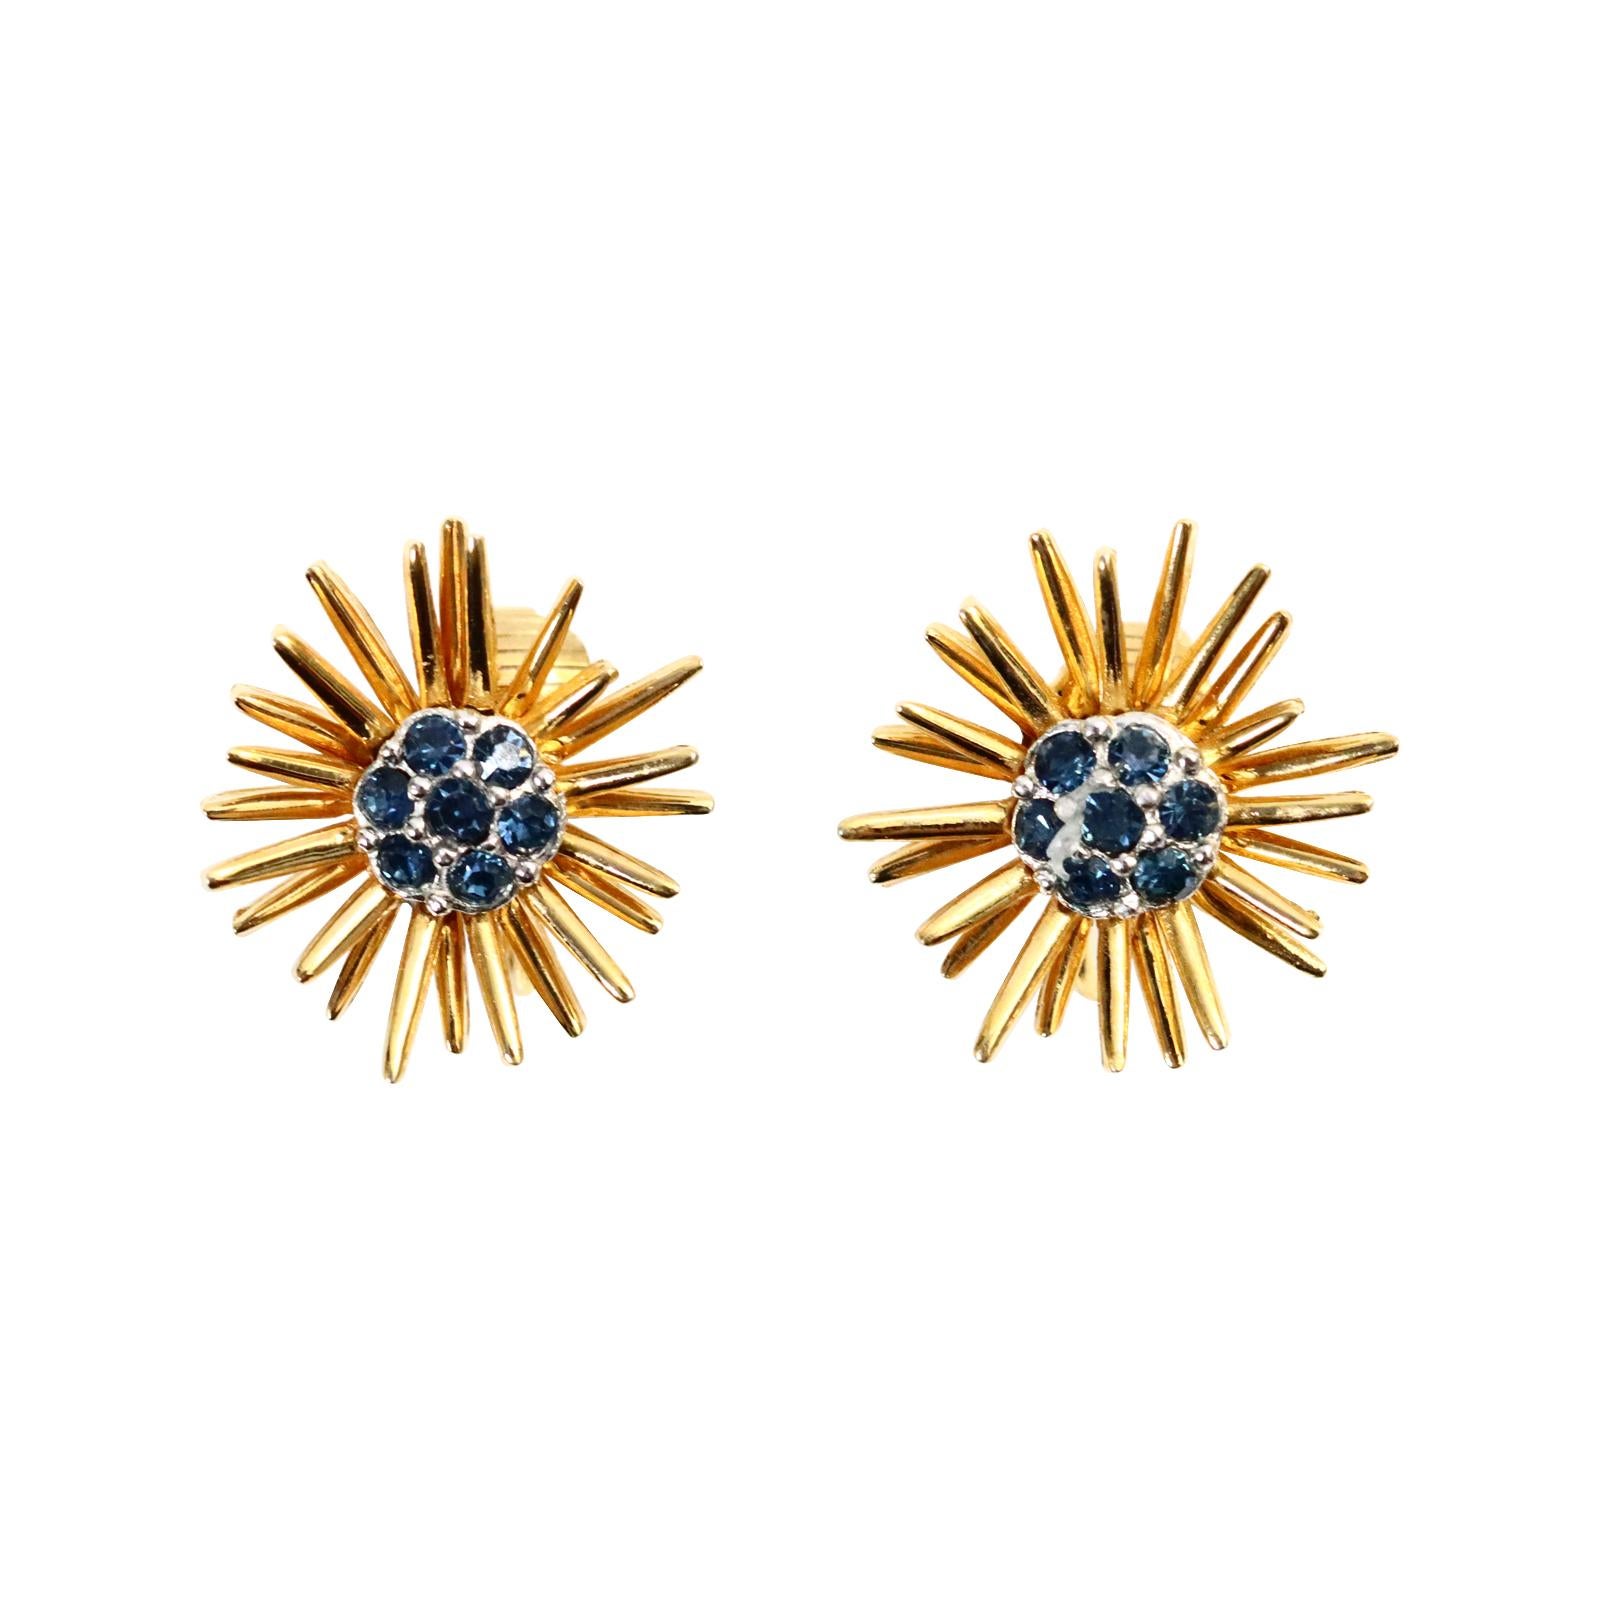 Vintage D'orlan Gold Starburst with Blue Diamante Earrings Circa 1980s. These earrings look so chic due to its juxtaposition with the gold and then the blue set in silver tone metal in the middle. They are well made and give the air of fine jewelry.